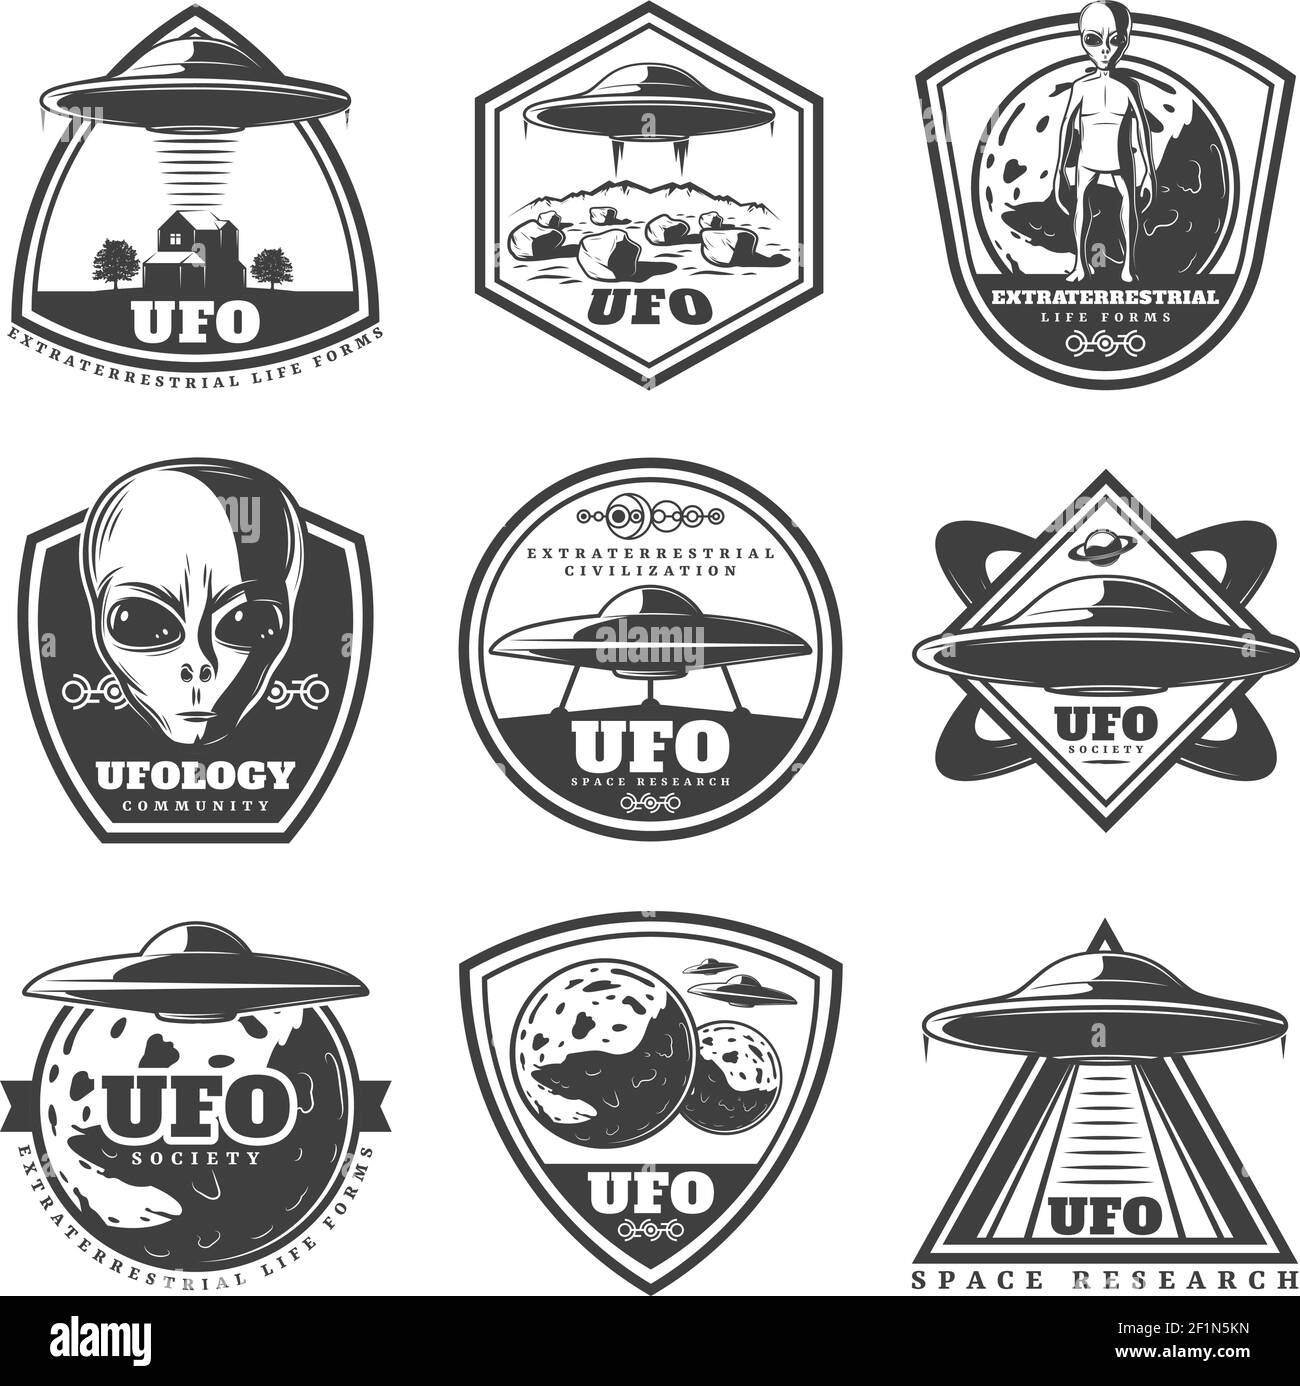 Vintage monochrome UFO labels set with alien spaceships unknown planets extraterrestrial life forms isolated vector illustration Stock Vector